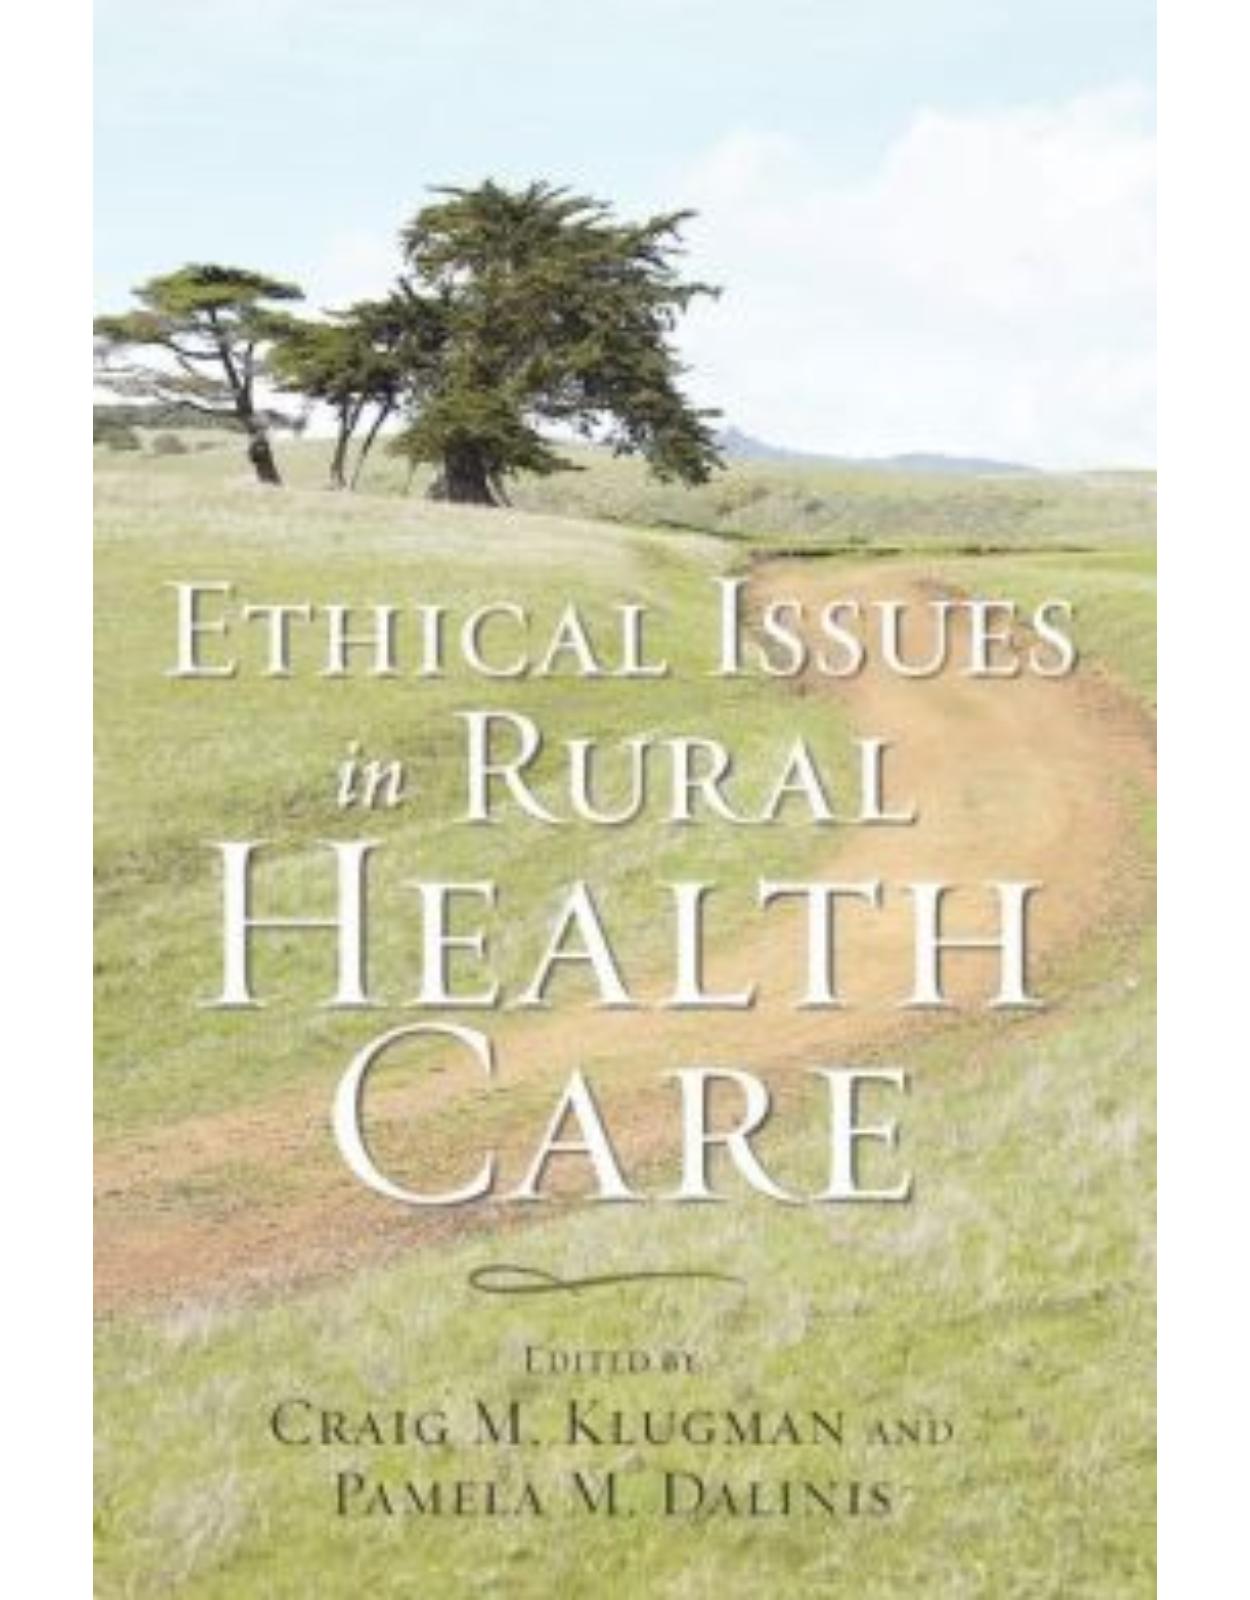 Ethical Issues in Rural Health Care.